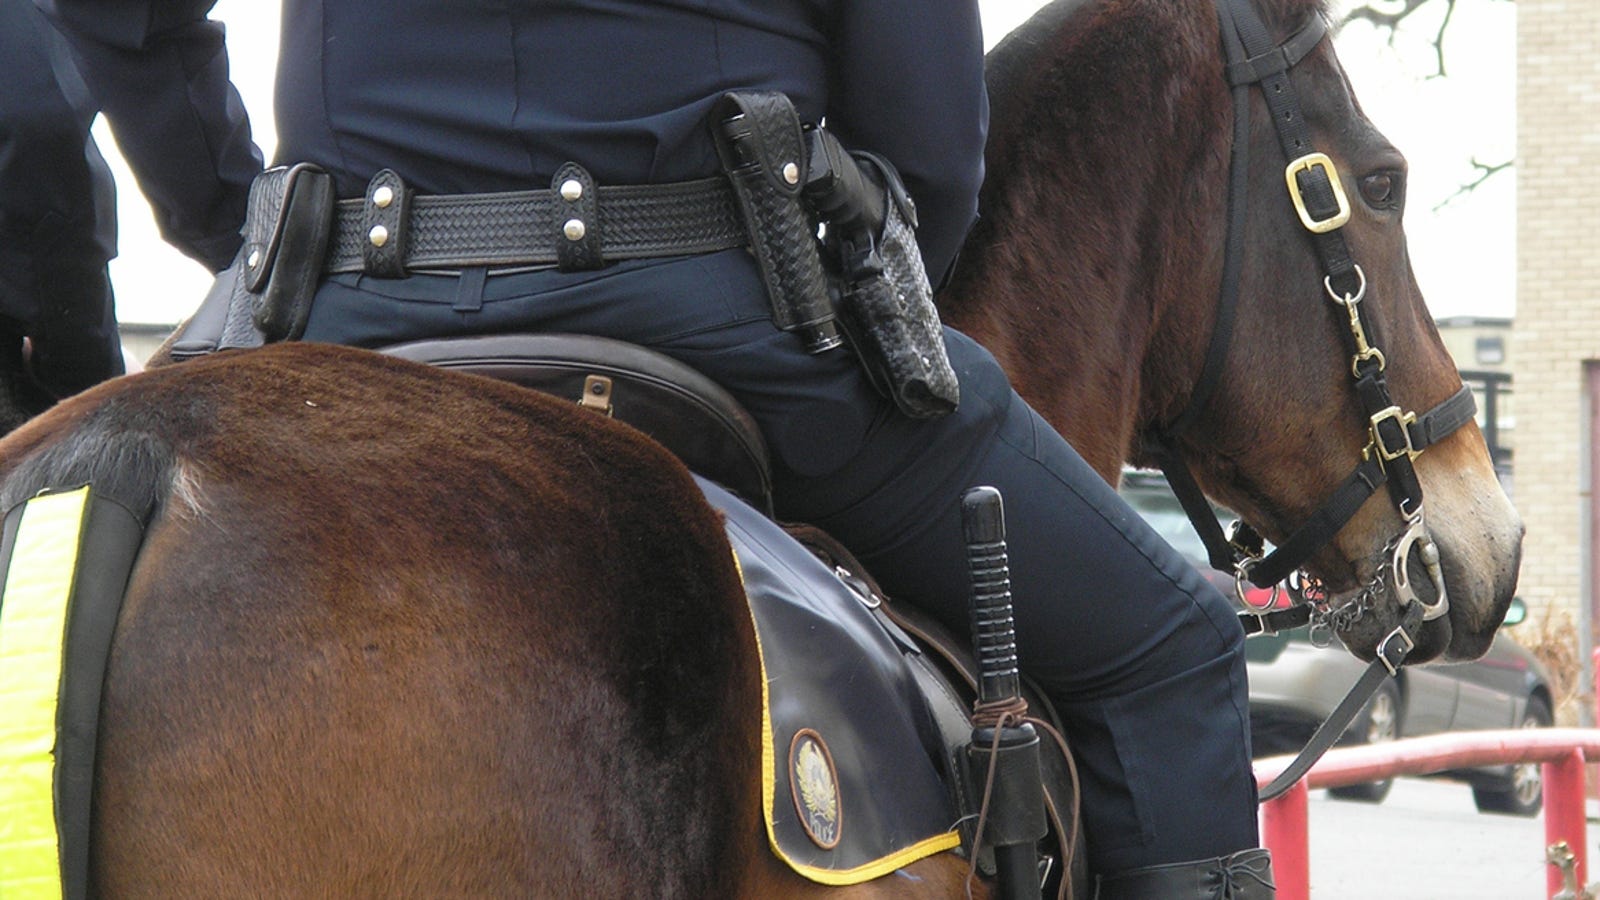 Black Man Walked on Rope by Mounted Police Has Mental Illness, According to Family1600 x 900